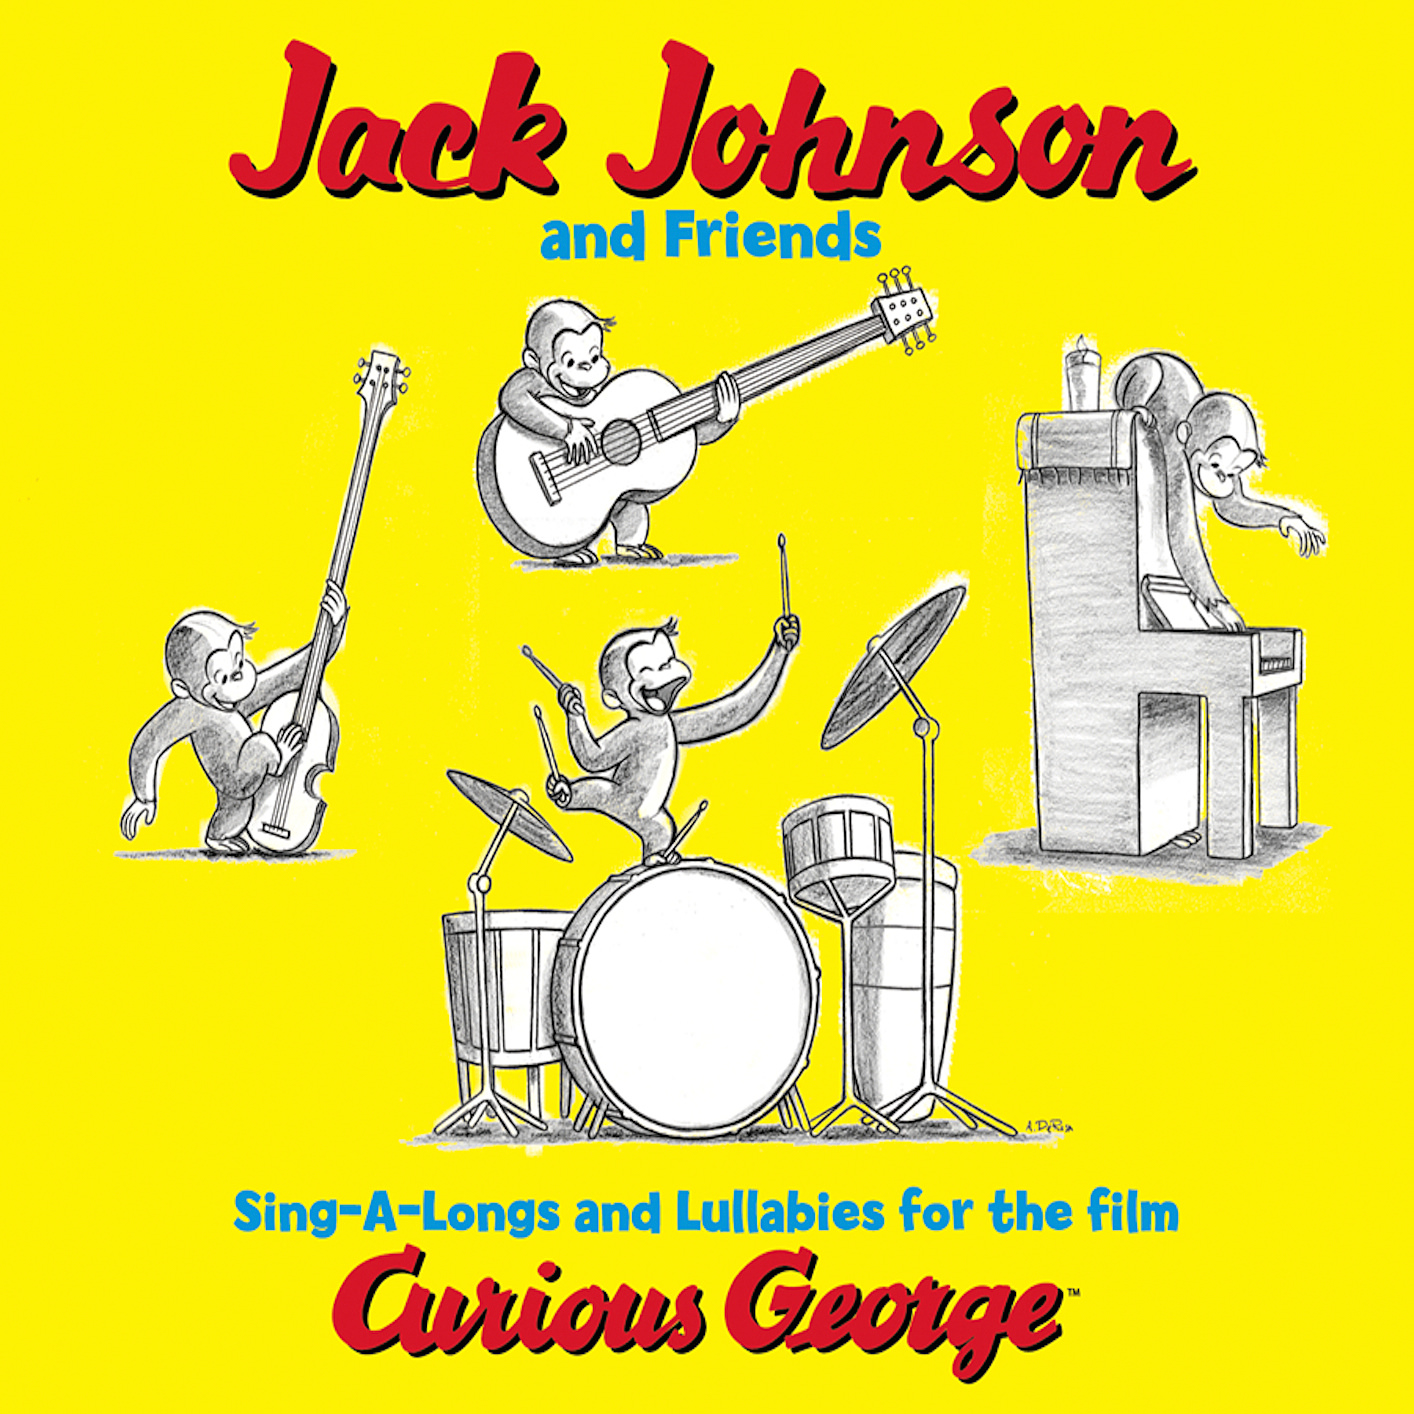 Jack Johnson – Sing-A-Longs And Lullabies For The Film Curious George (2006/2014) [Qobuz FLAC 24bit/96kHz]